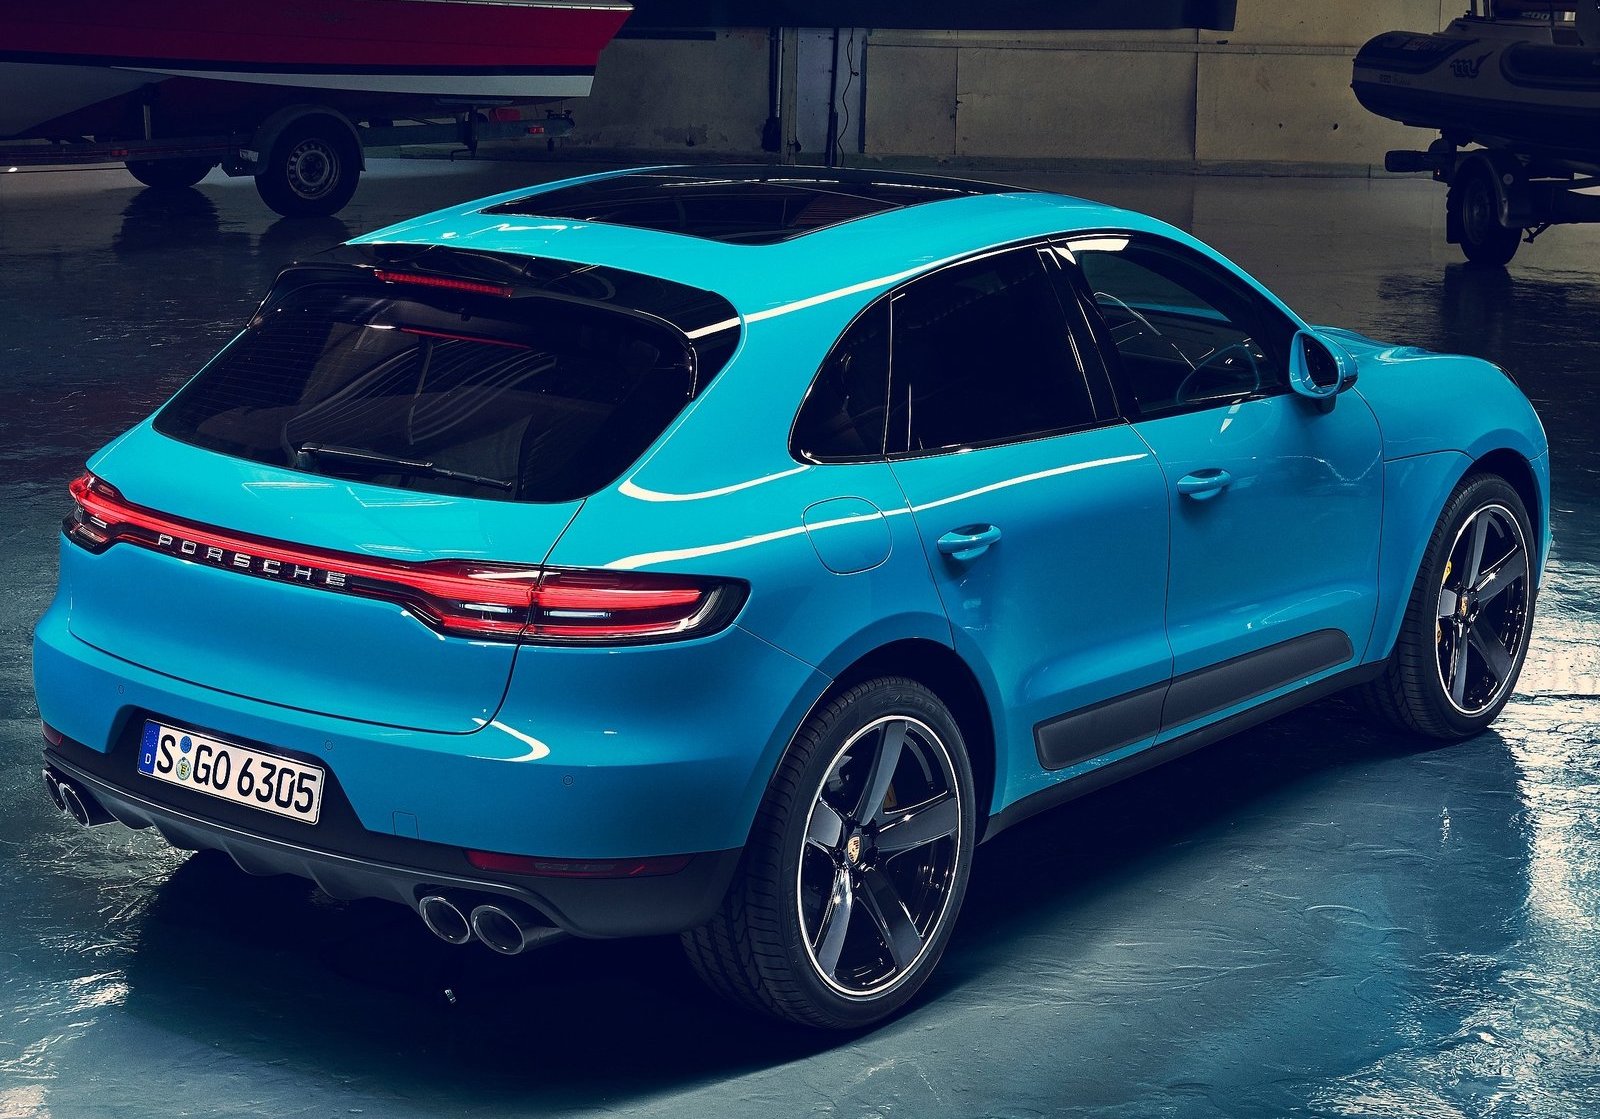 2019 Porsche Macan unveiled with updated tech